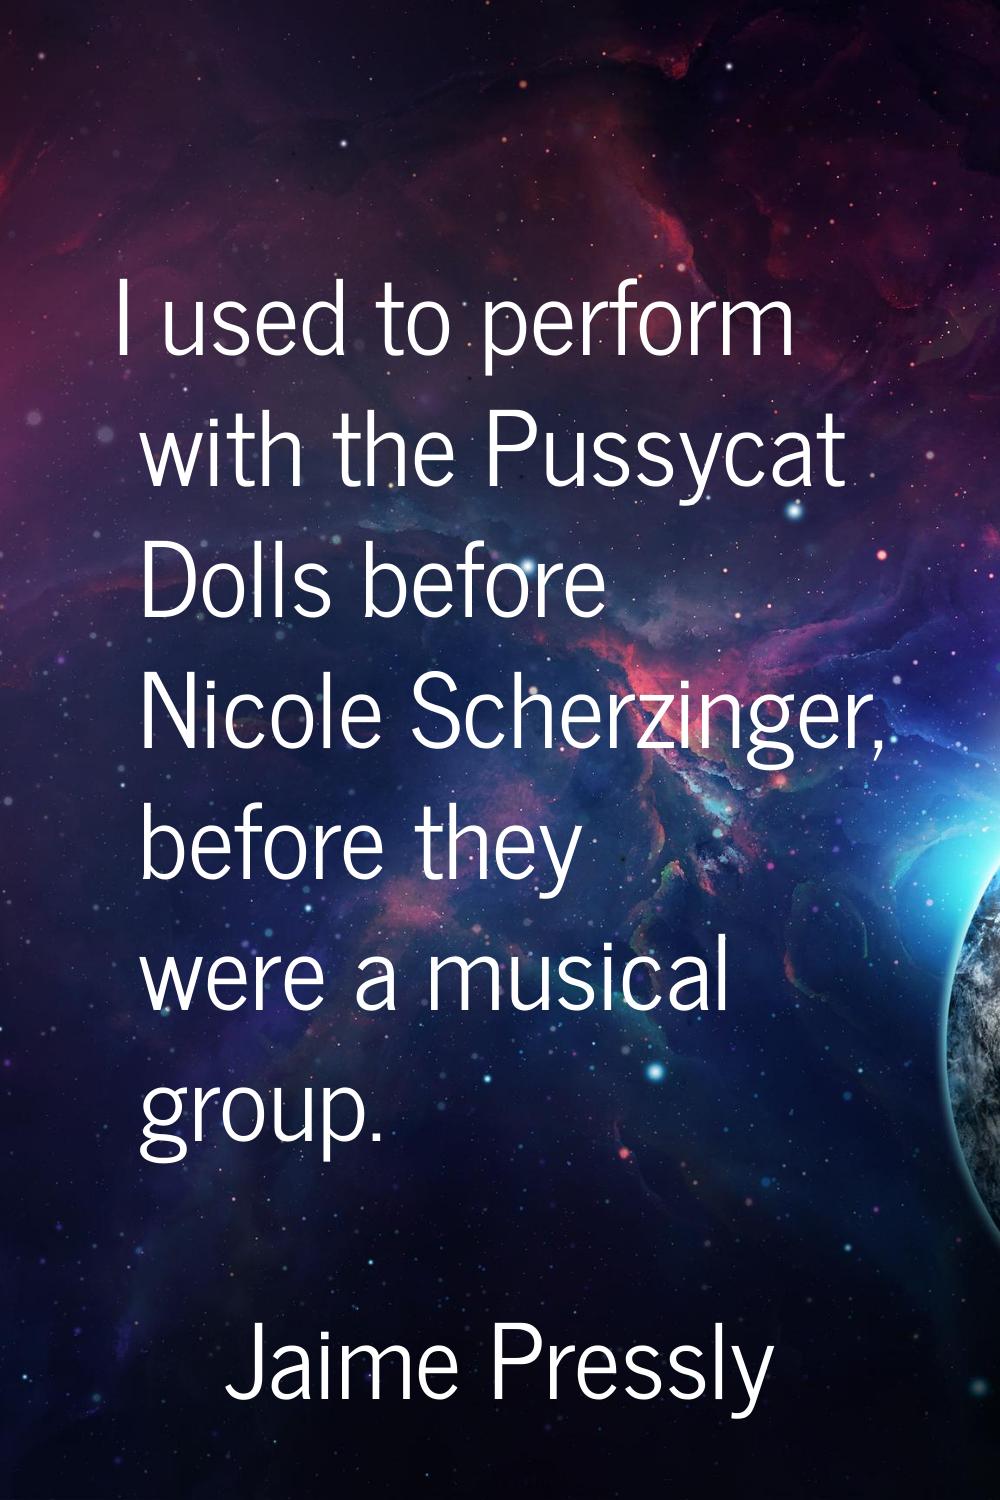 I used to perform with the Pussycat Dolls before Nicole Scherzinger, before they were a musical gro